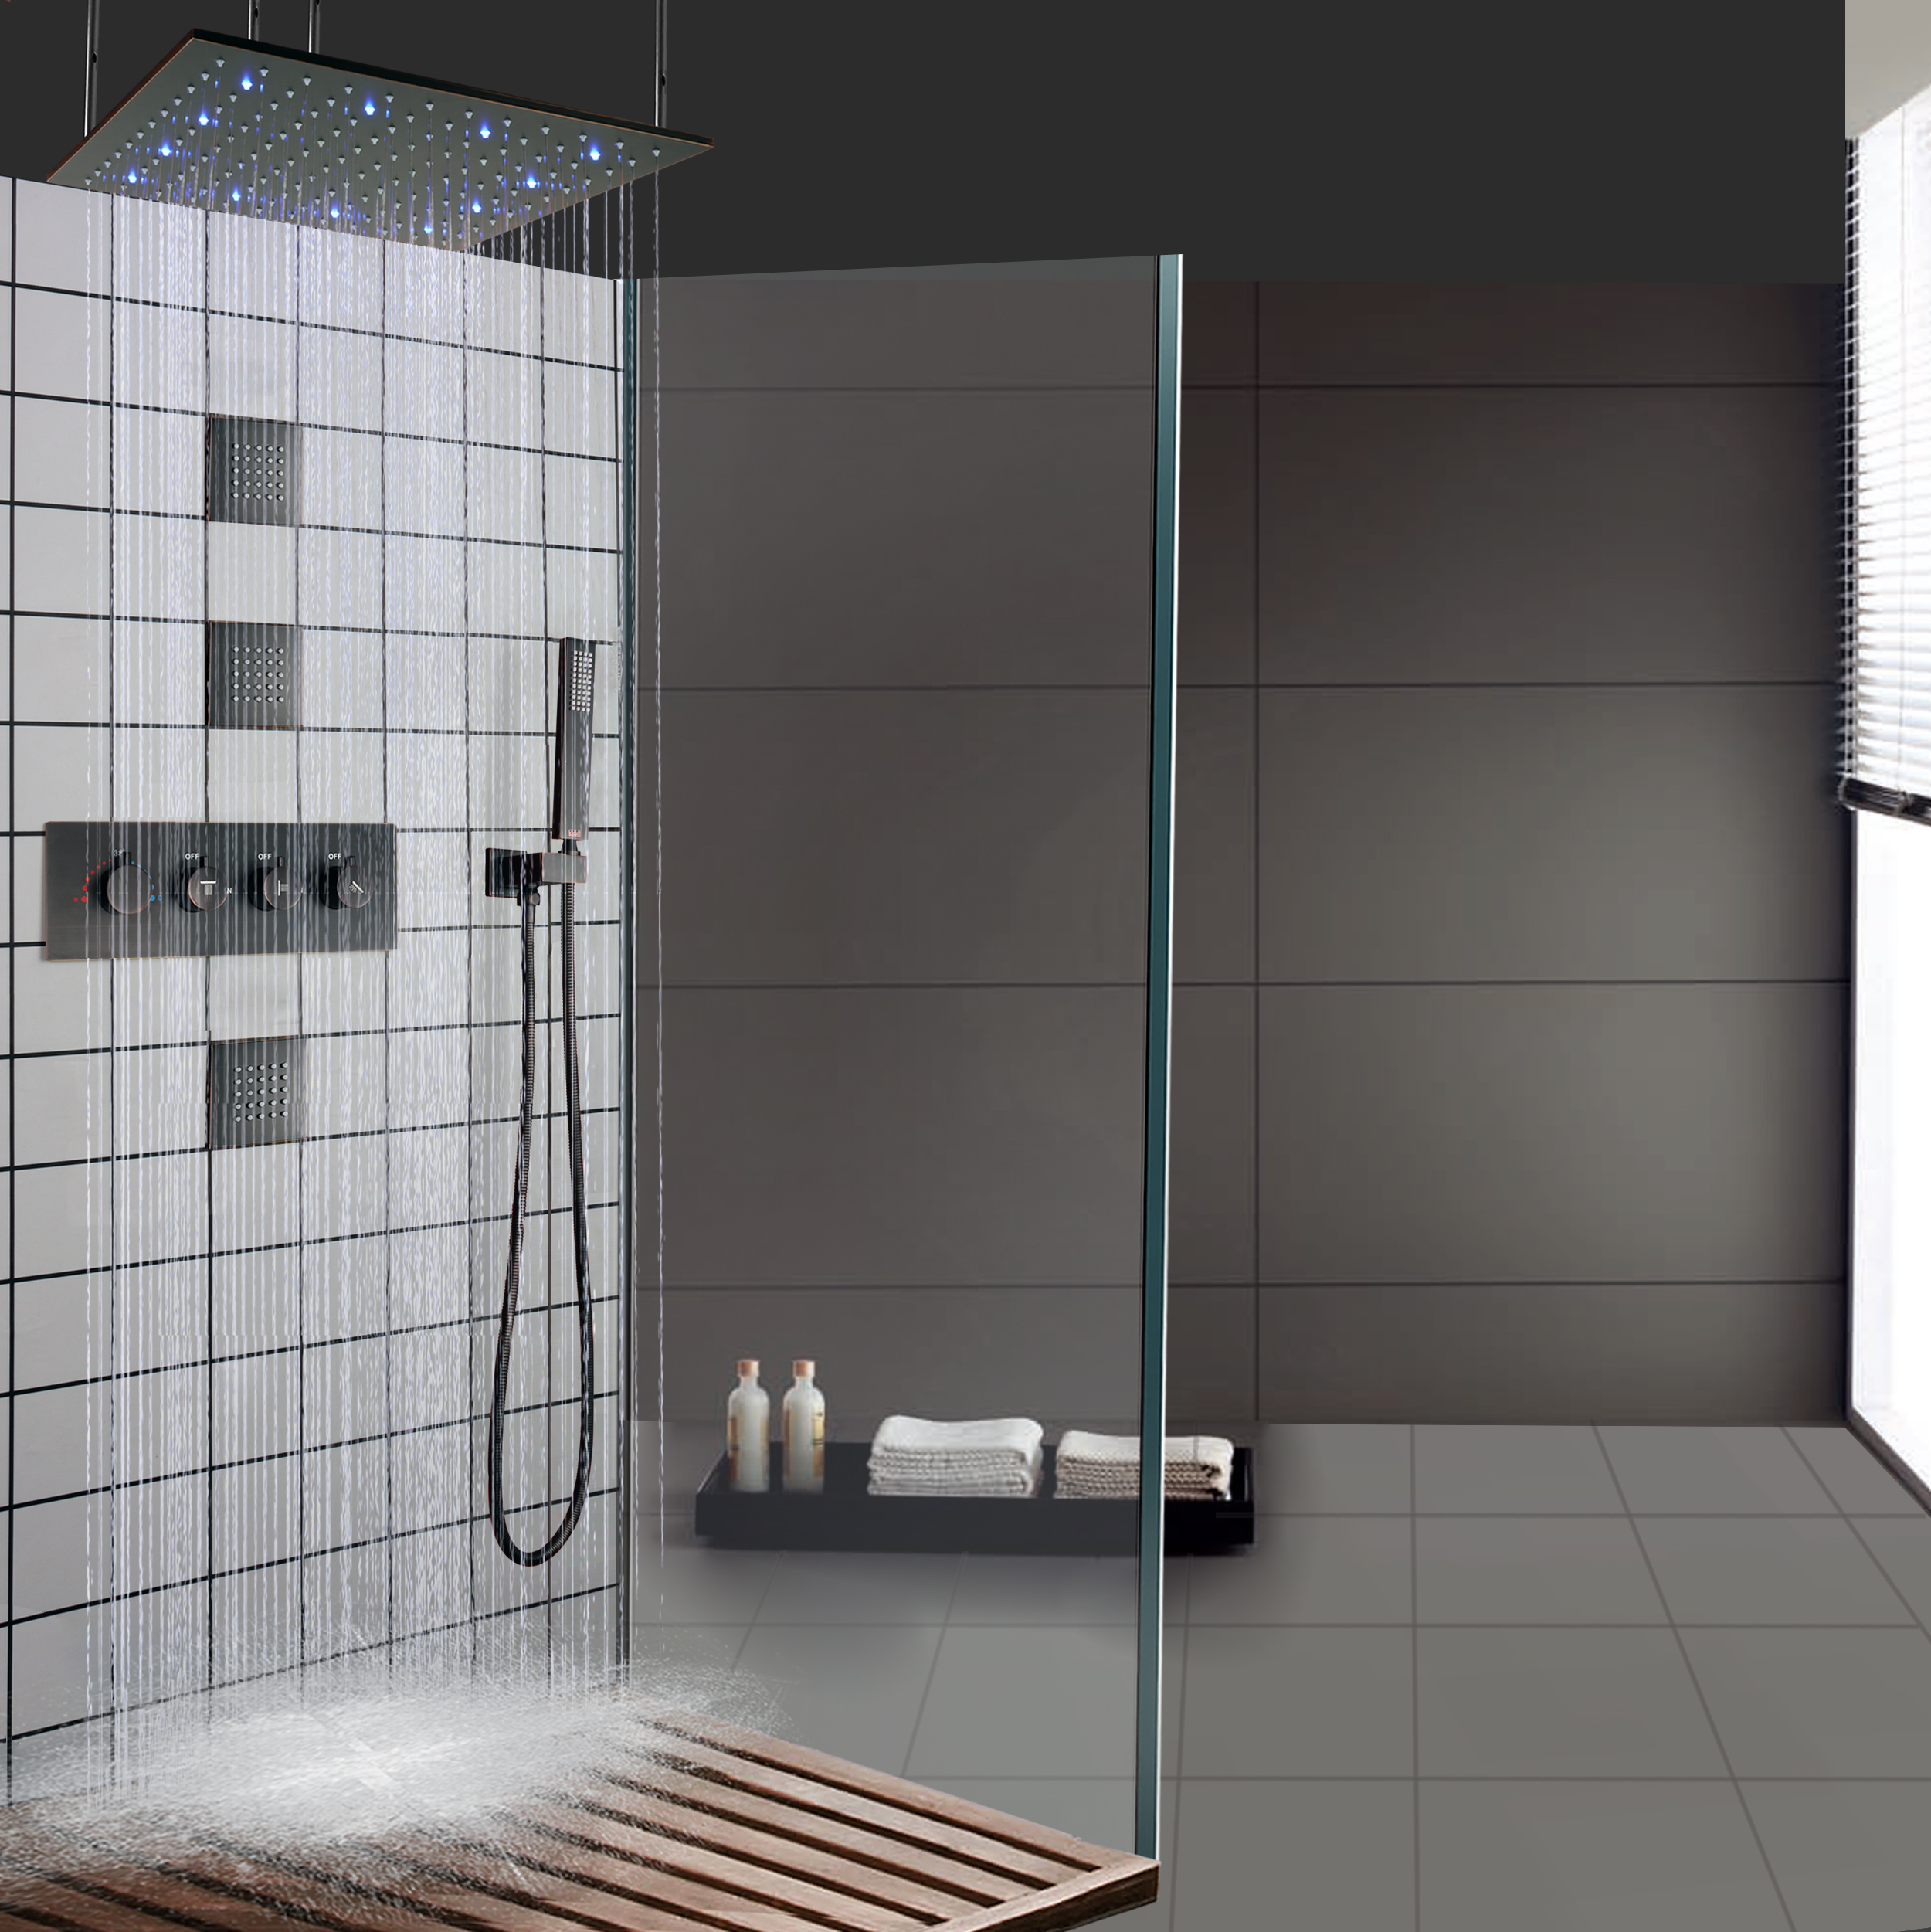 Oil Rubbed Bronze LED Thermostatic Shower Mixer Bathroom Ceiling Rainfall Handheld Shower Arm